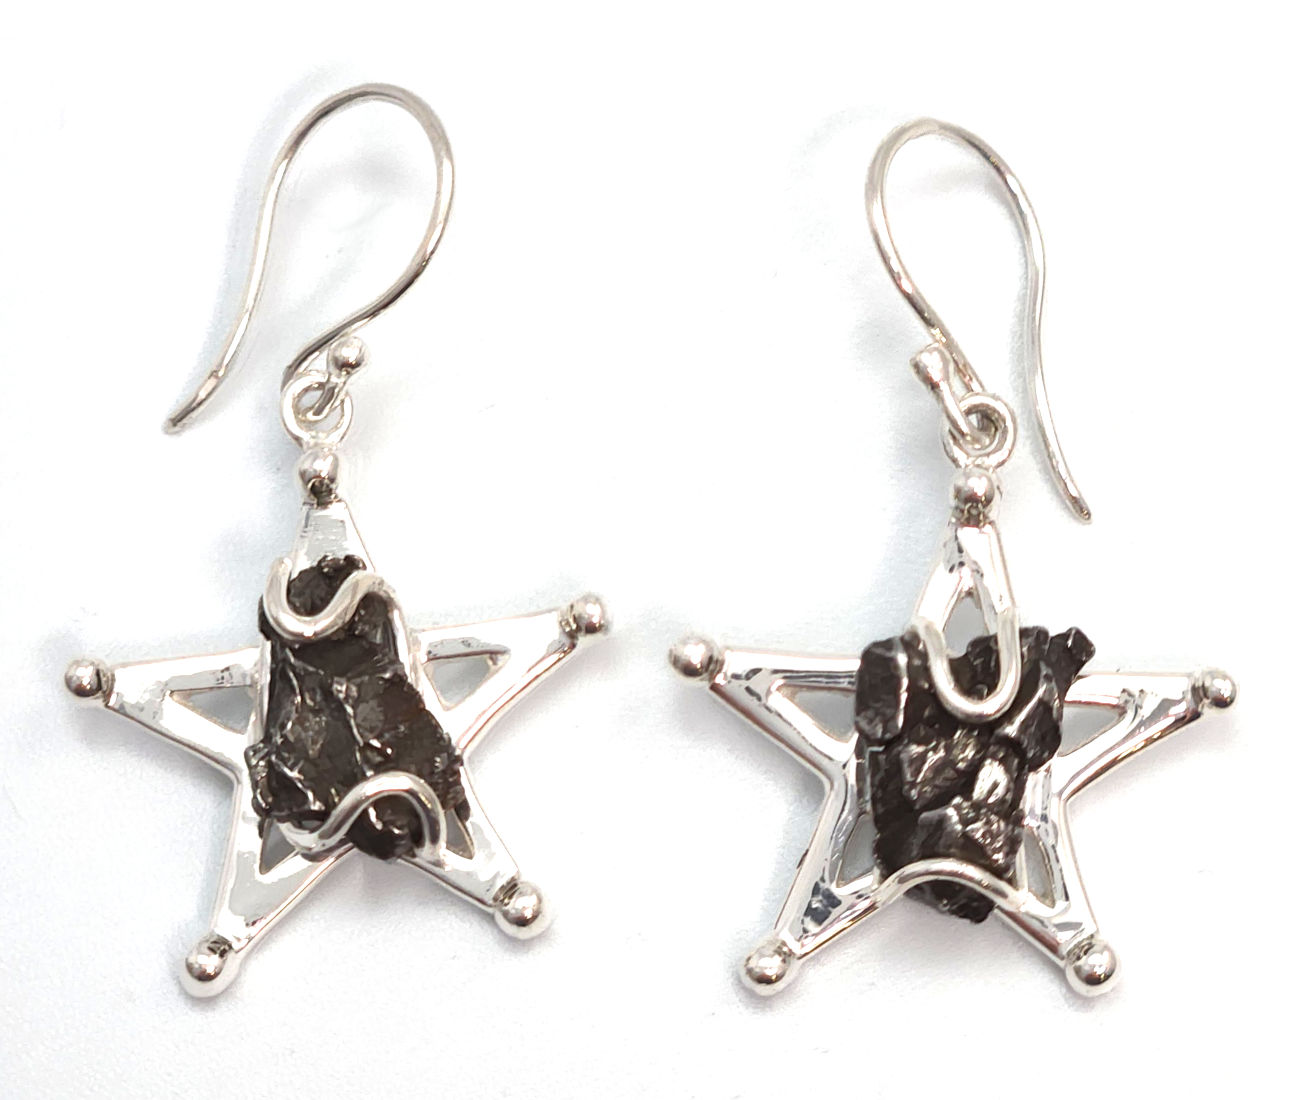 Campo Del Cielo Meteorite specimens on sterling silver star earrings by Starborn Creations